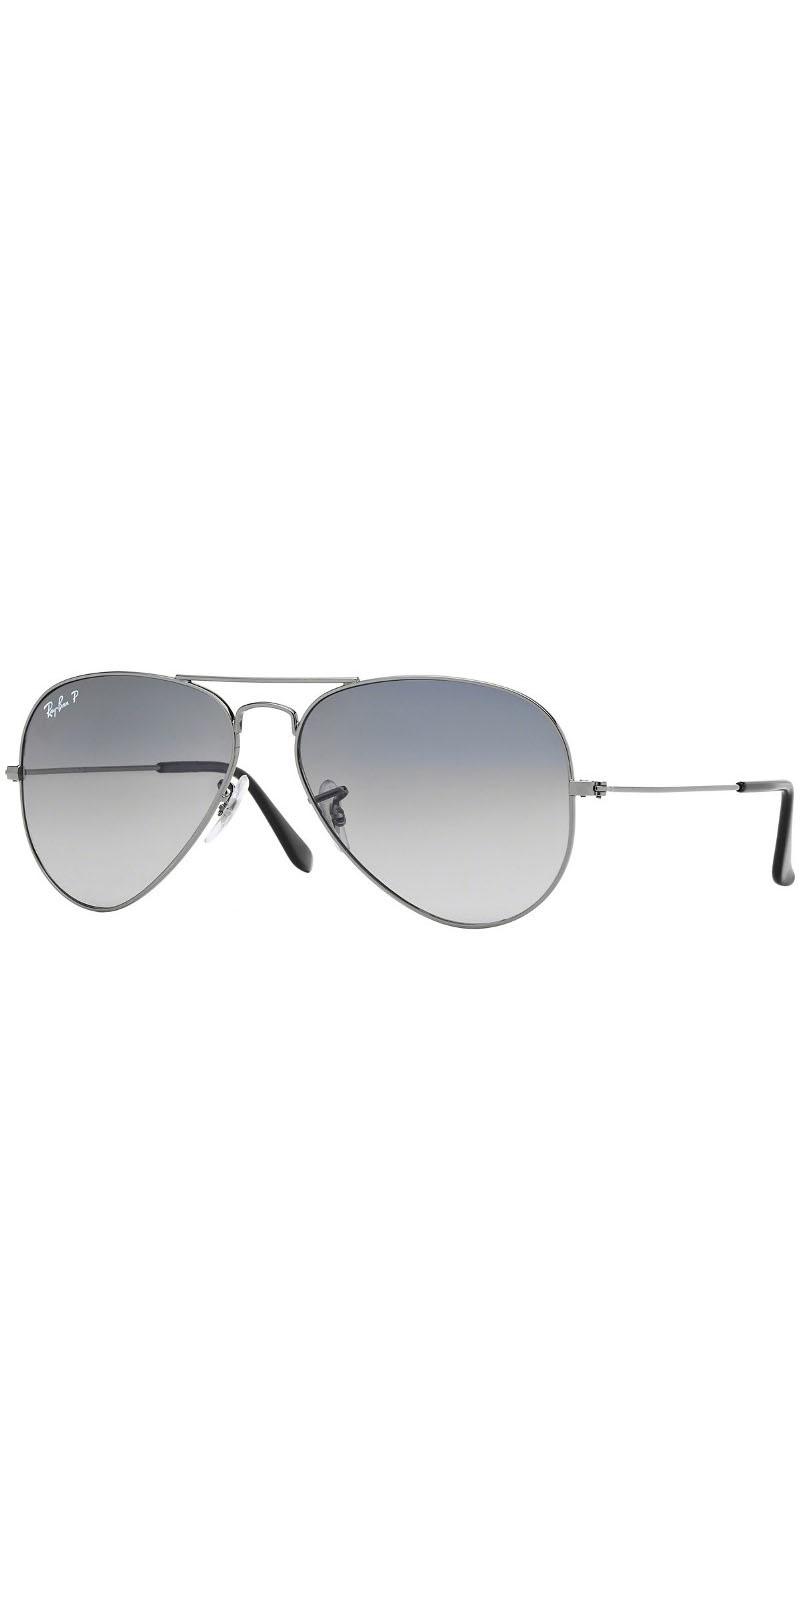 Ray-Ban Sunglasses - RB3025-004/78-58 - LifeStyle Collection